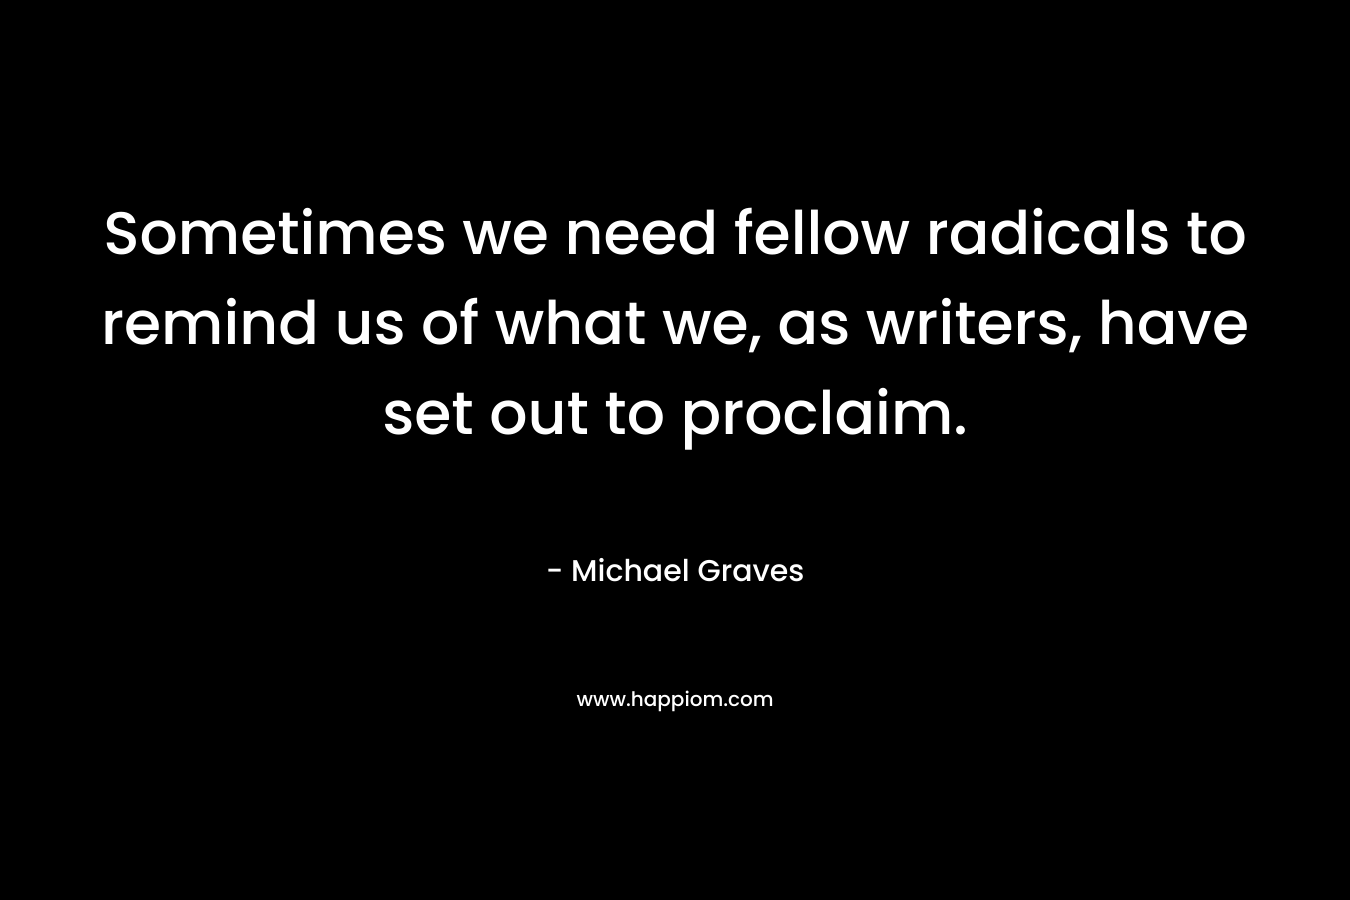 Sometimes we need fellow radicals to remind us of what we, as writers, have set out to proclaim. – Michael Graves